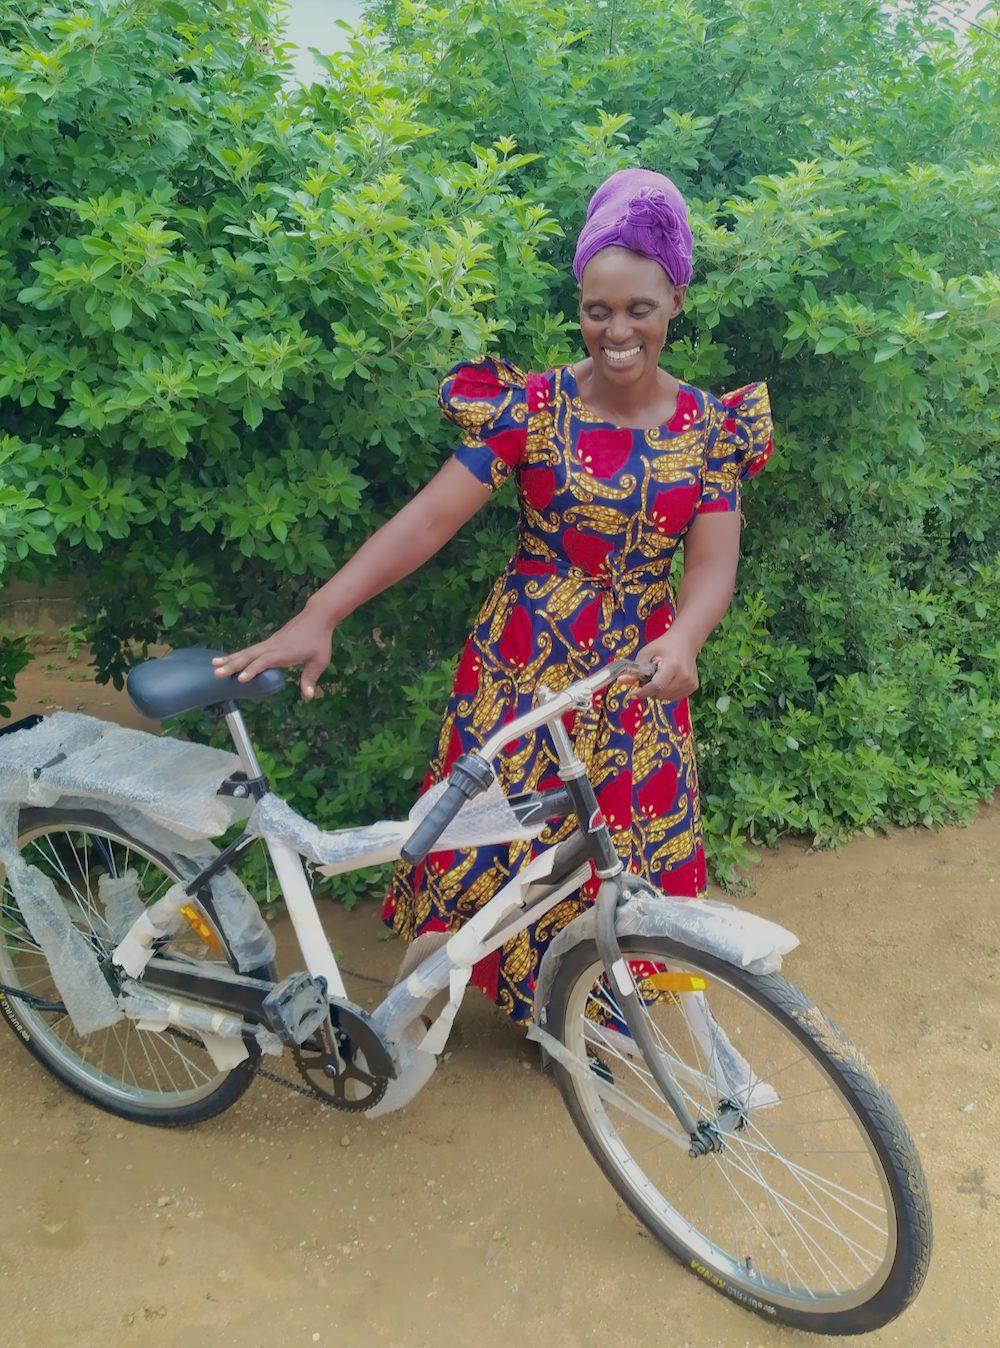 A smiling woman wearing a purple headscarf and floral dress admires her new bicycle.